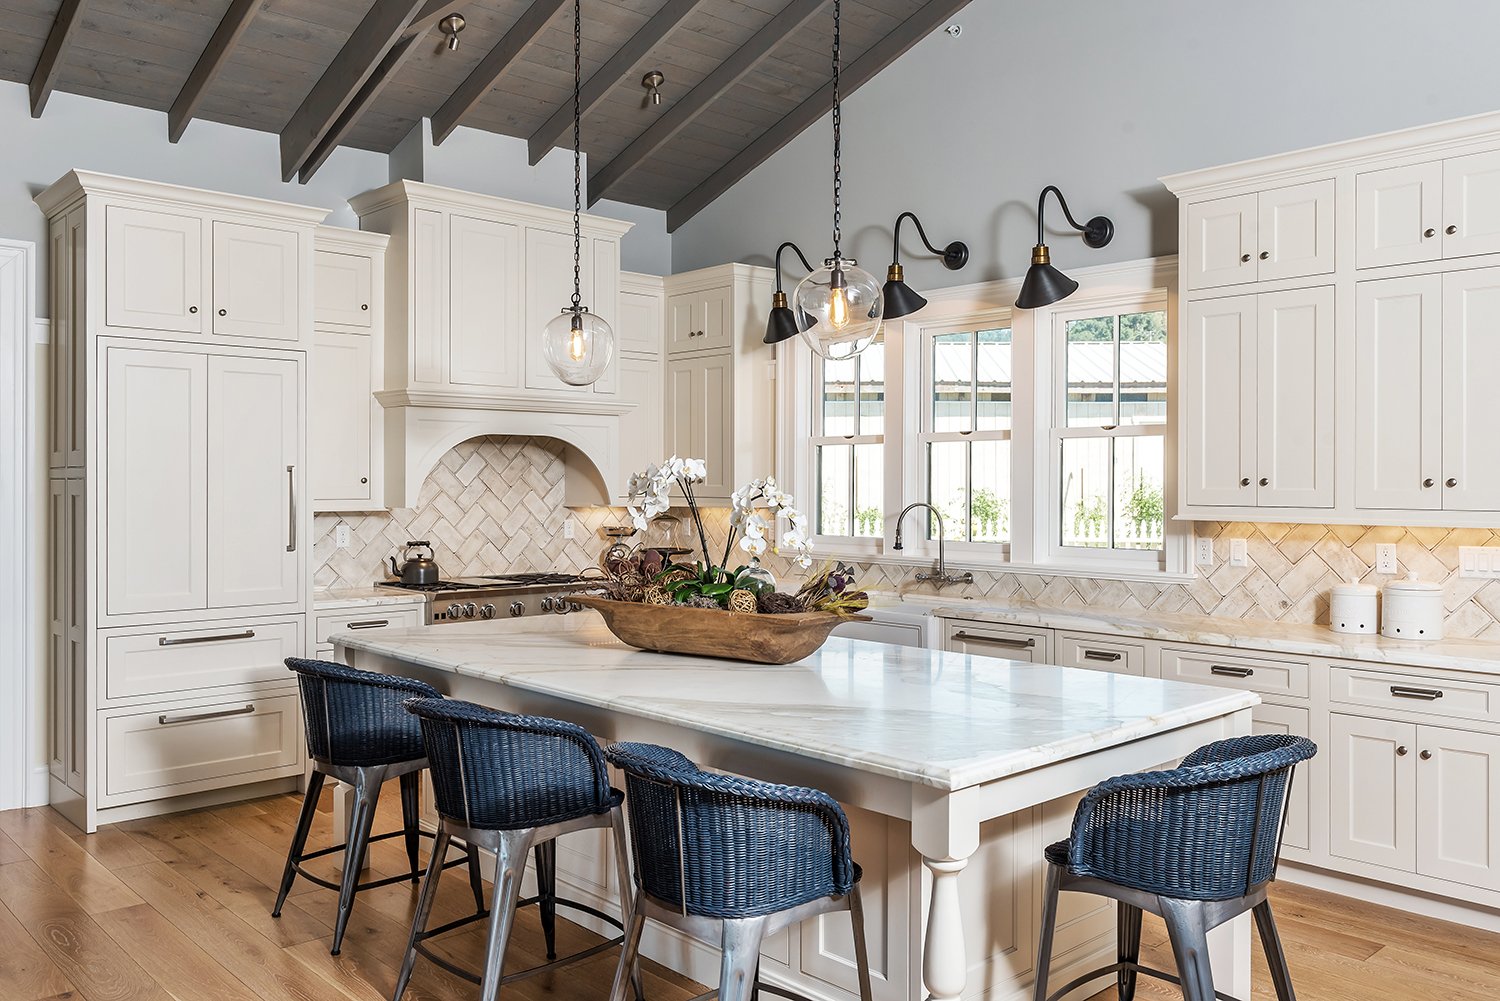  A kitchen island with blue wicker stools and glass hanging pendant lights.  